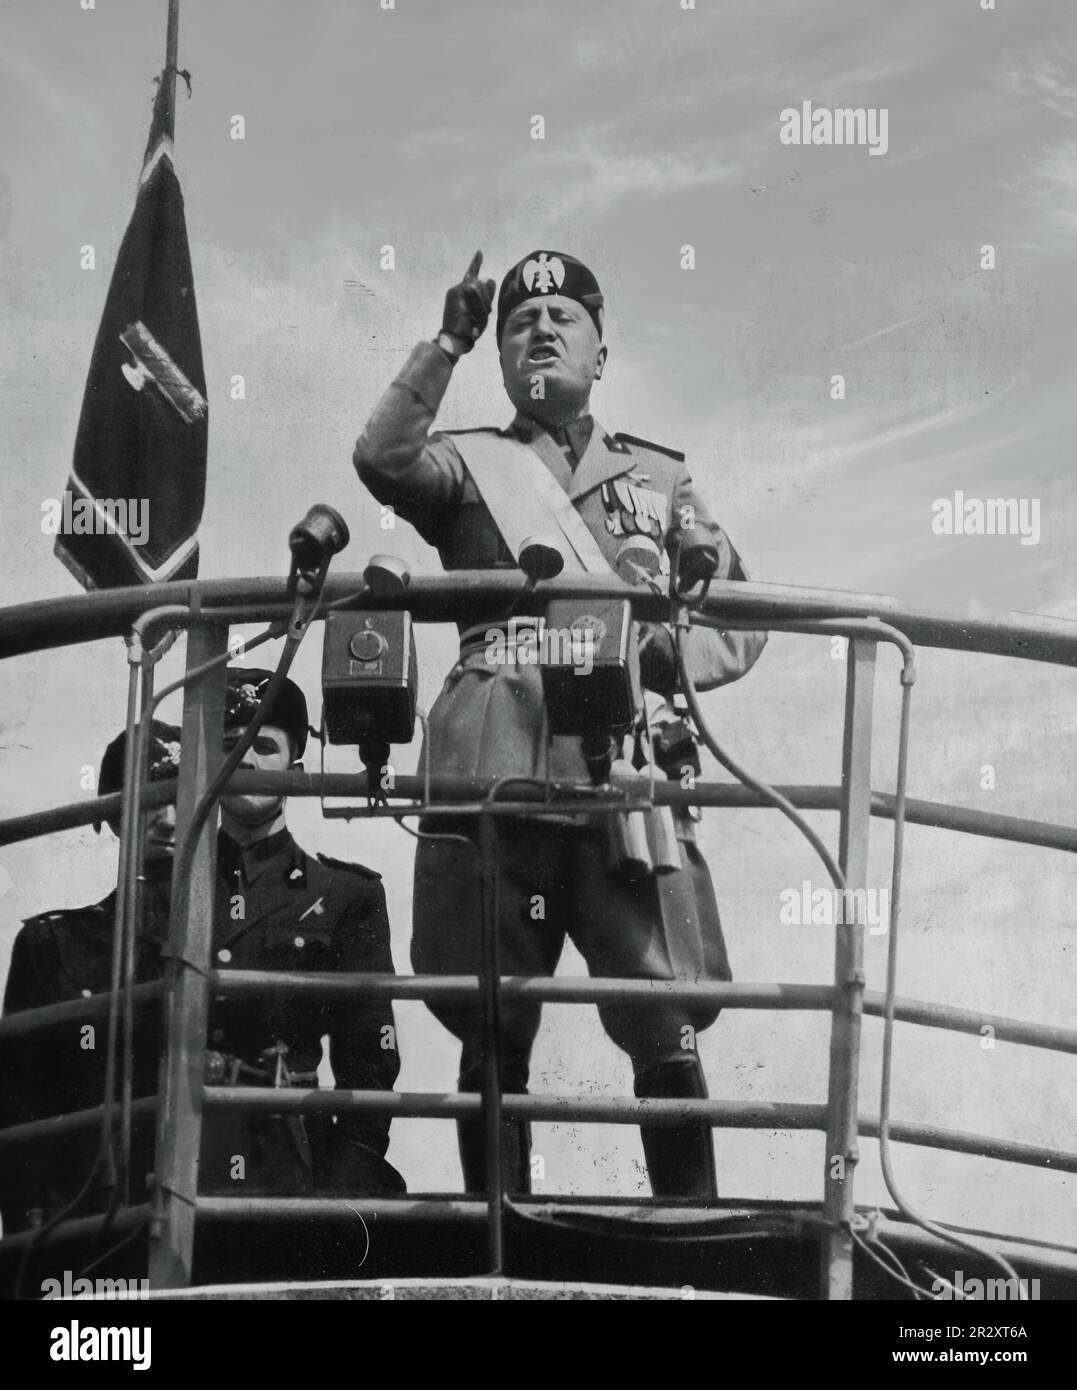 Benito Mussolini was the Italian dictator who in the last century founded the fascist regime Stock Photo